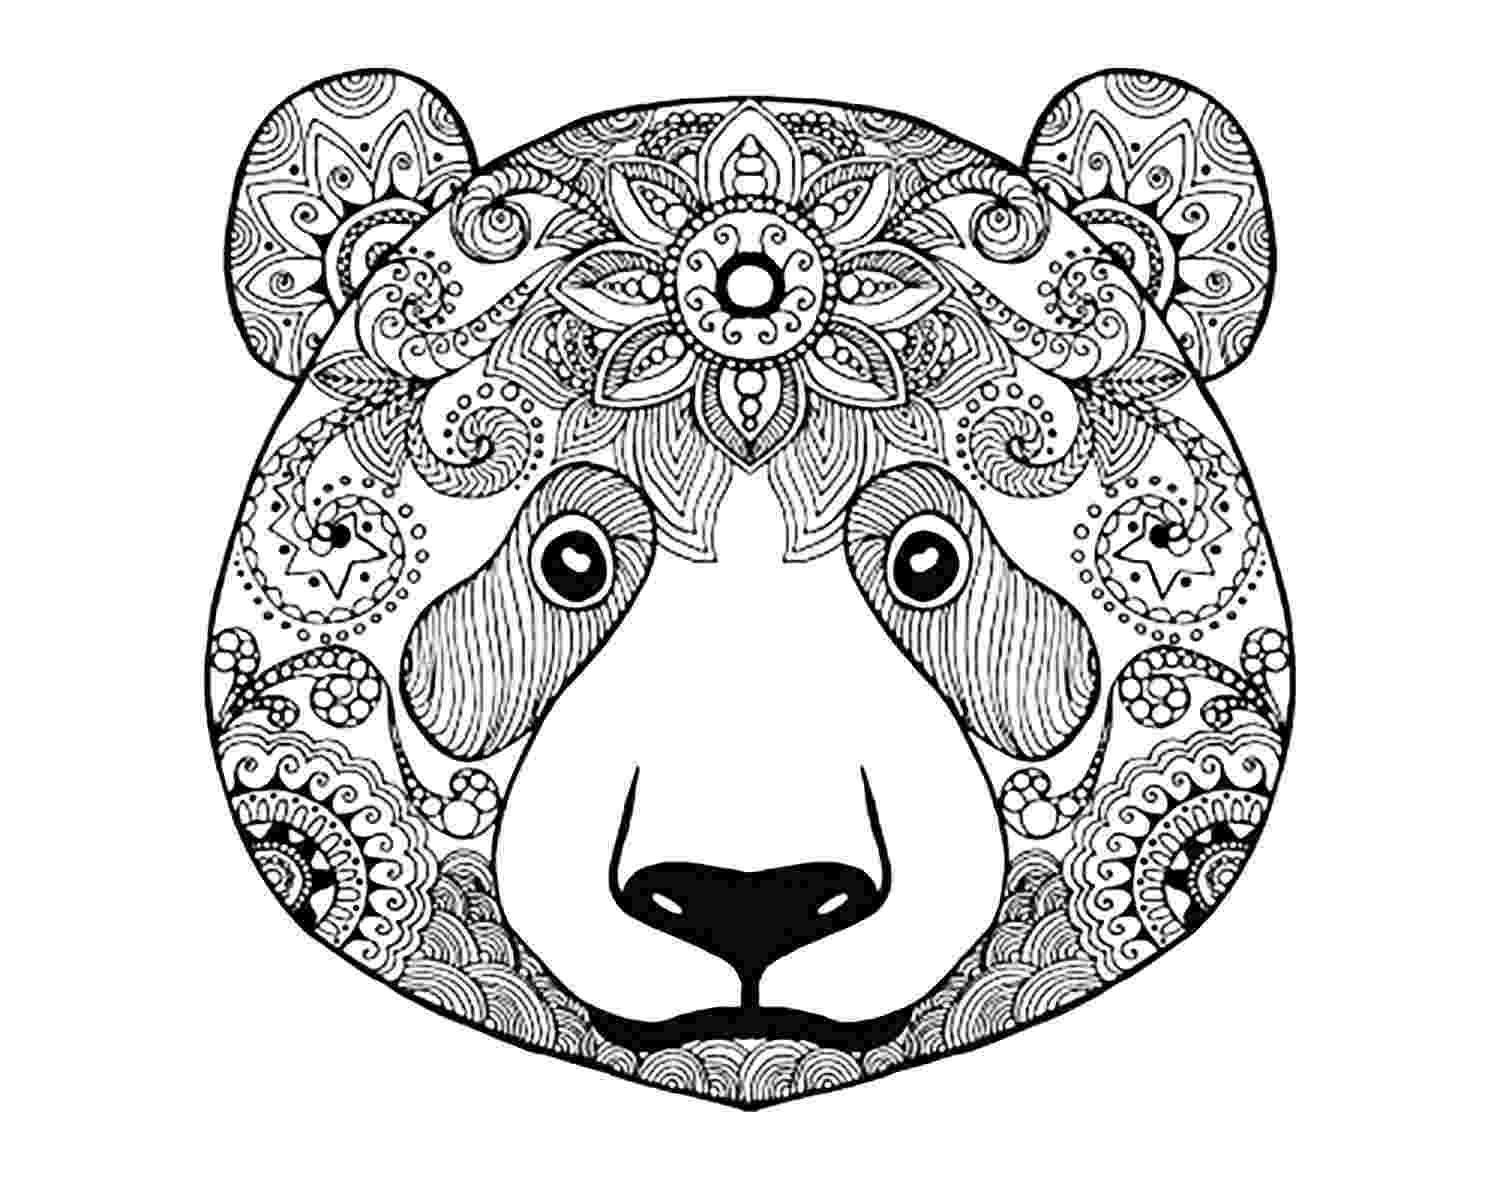 animal coloring pages adults adult coloring pages animals best coloring pages for kids animal pages adults coloring 